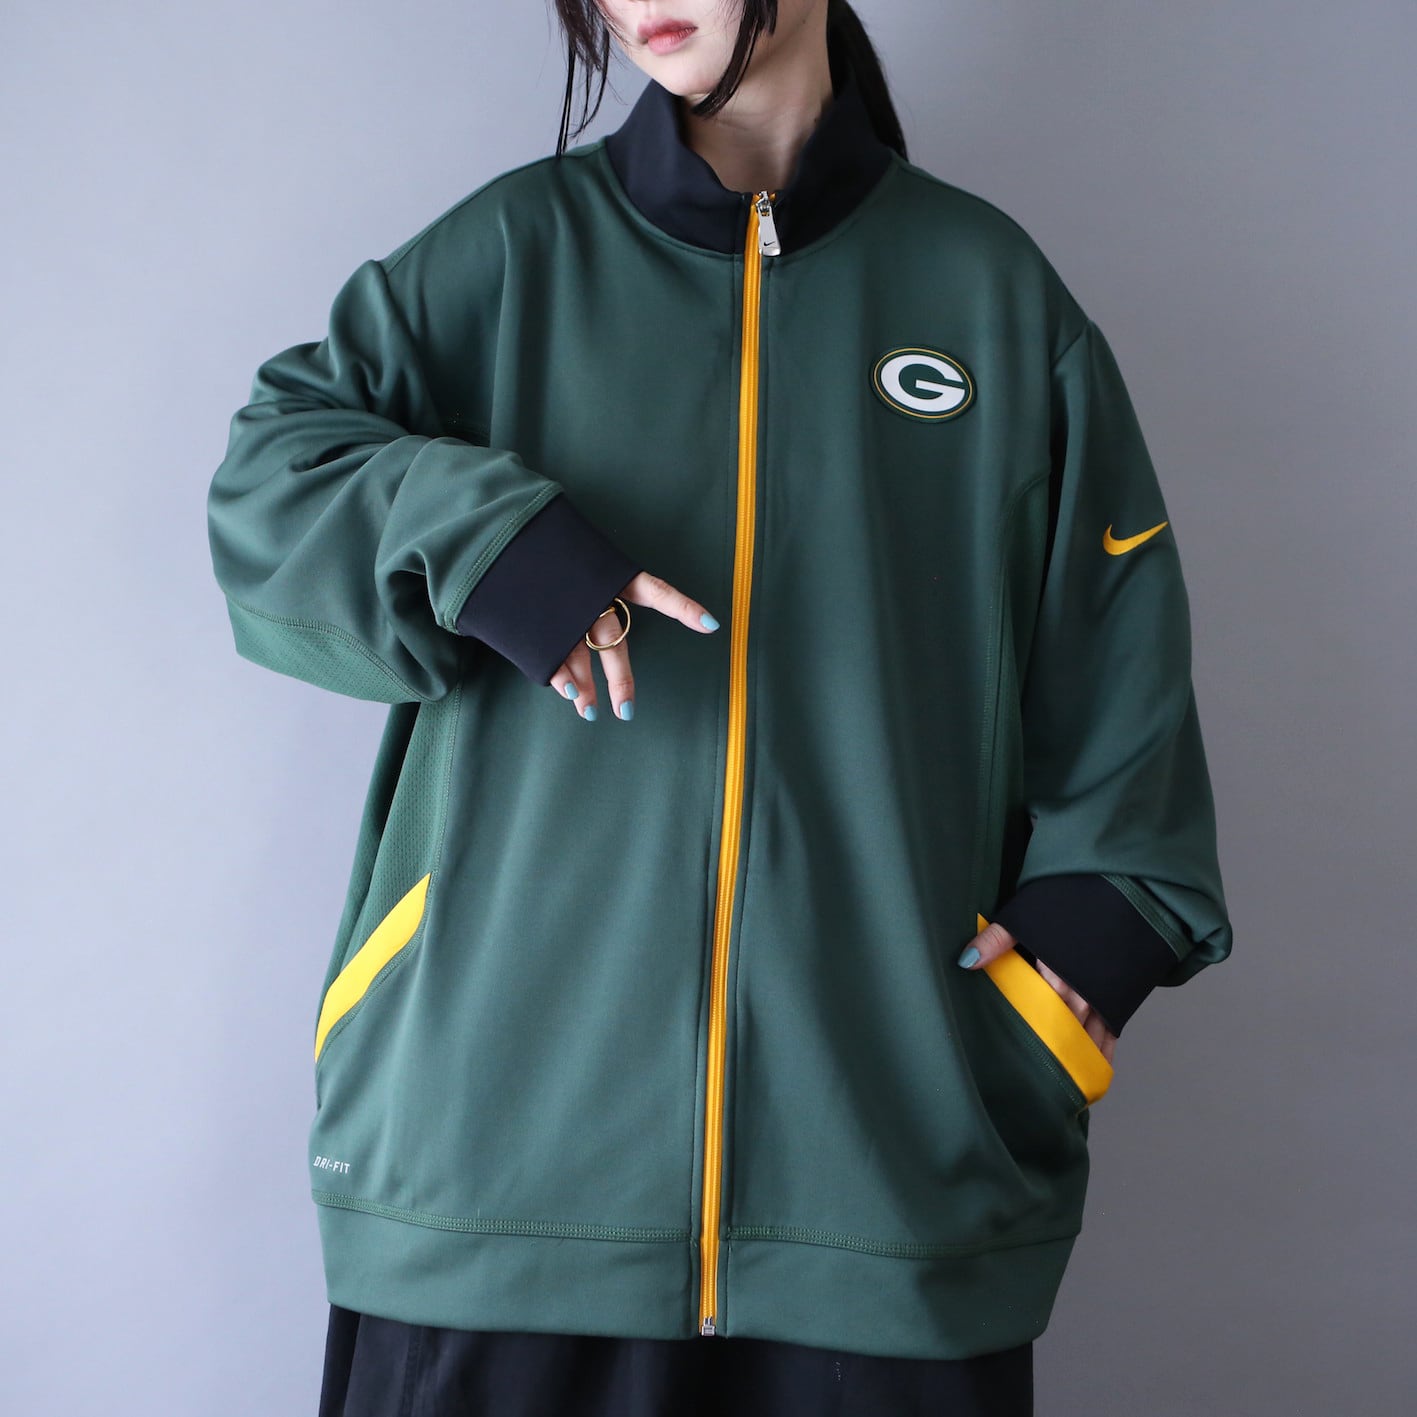 NFL×NIKE"Green Bay Packers XXL over silhouette track jacket | NIHIL